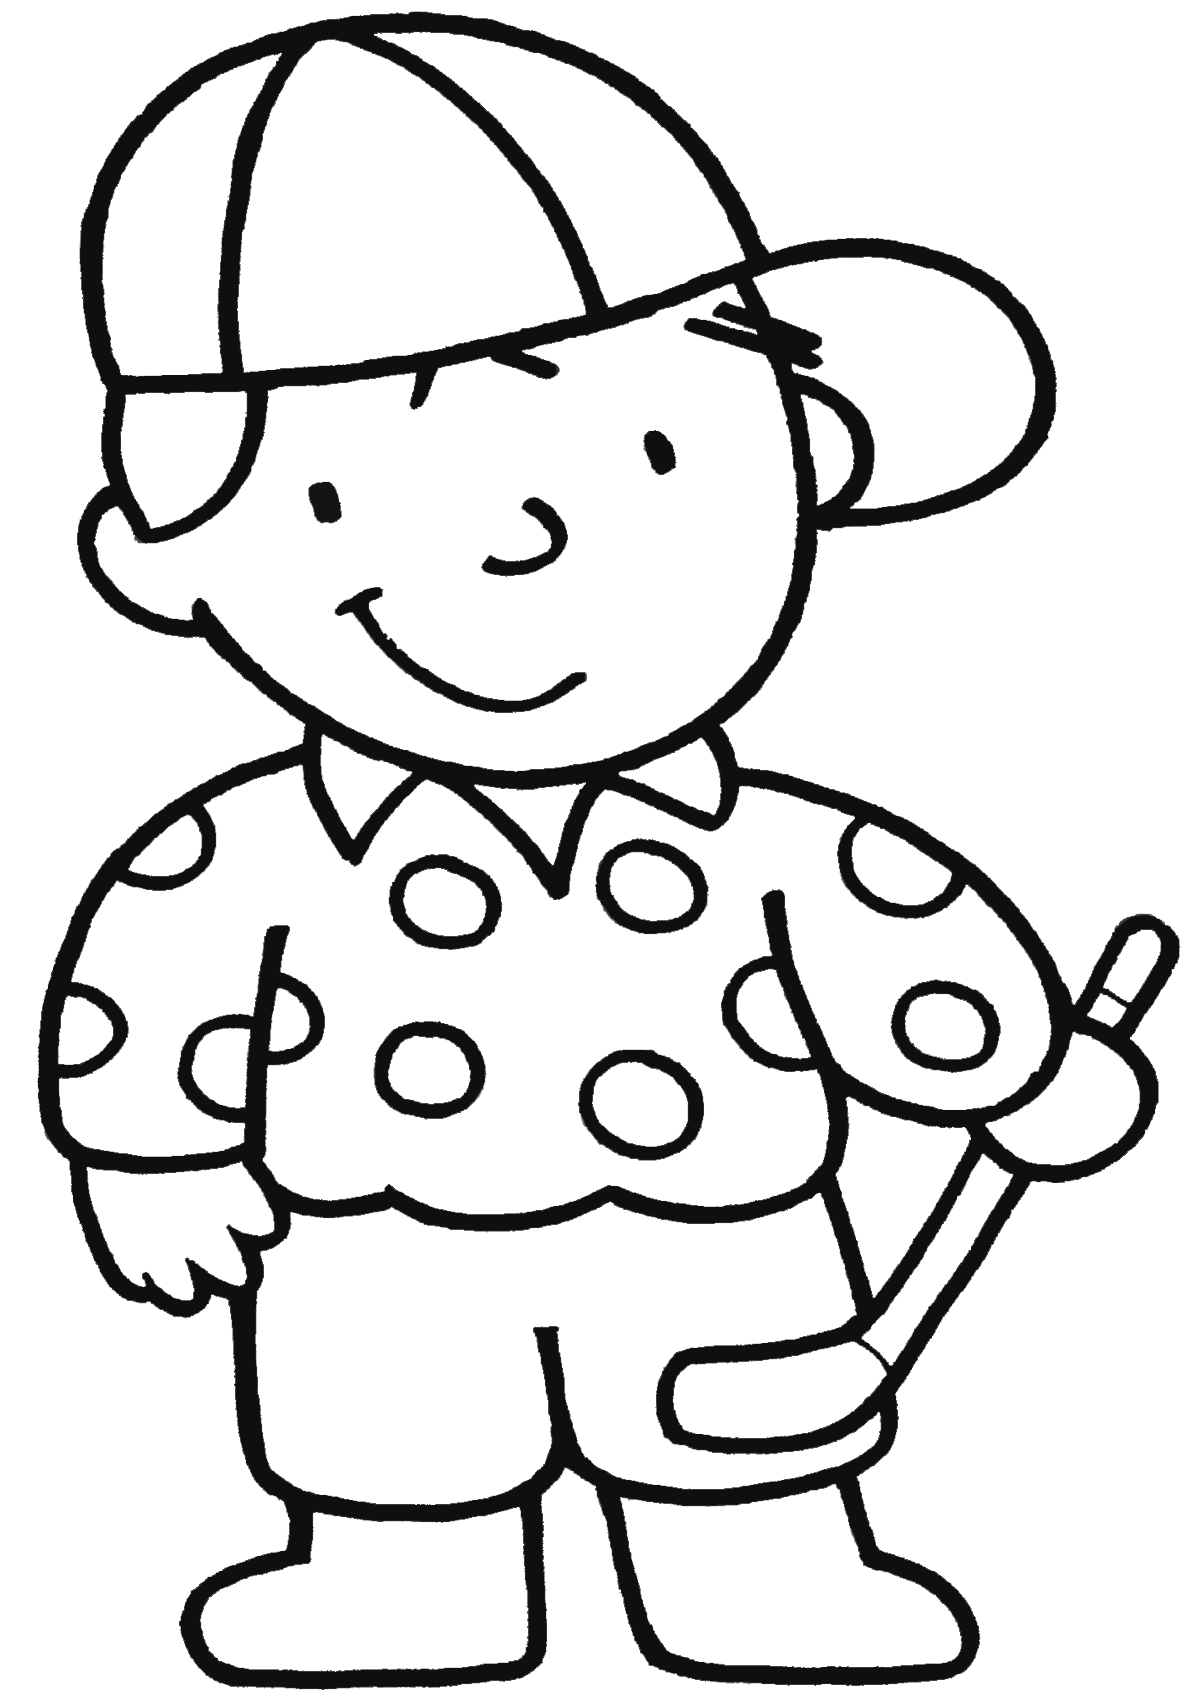 Boy coloring pages to download and print for free